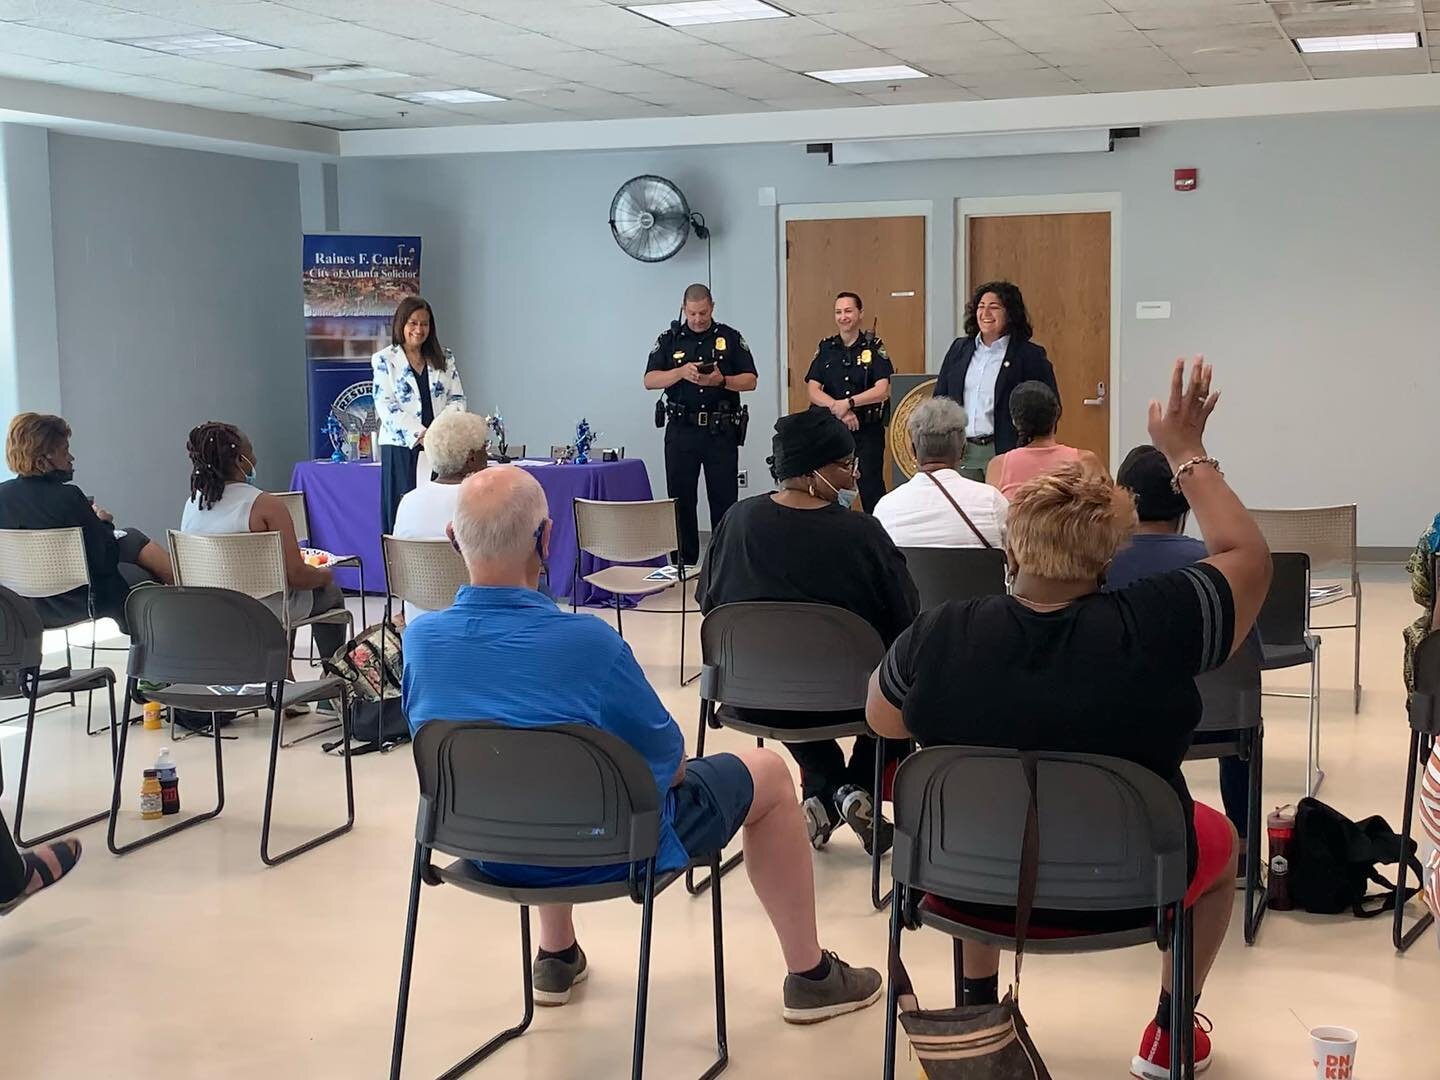 Thank you to the Office of the Solicitor and to my colleague Councilmember Michael Julian Bond for this morning&rsquo;s Senior Safety Event! We hope to continue to provide fun and informative sessions like these for our seniors throughout the distric